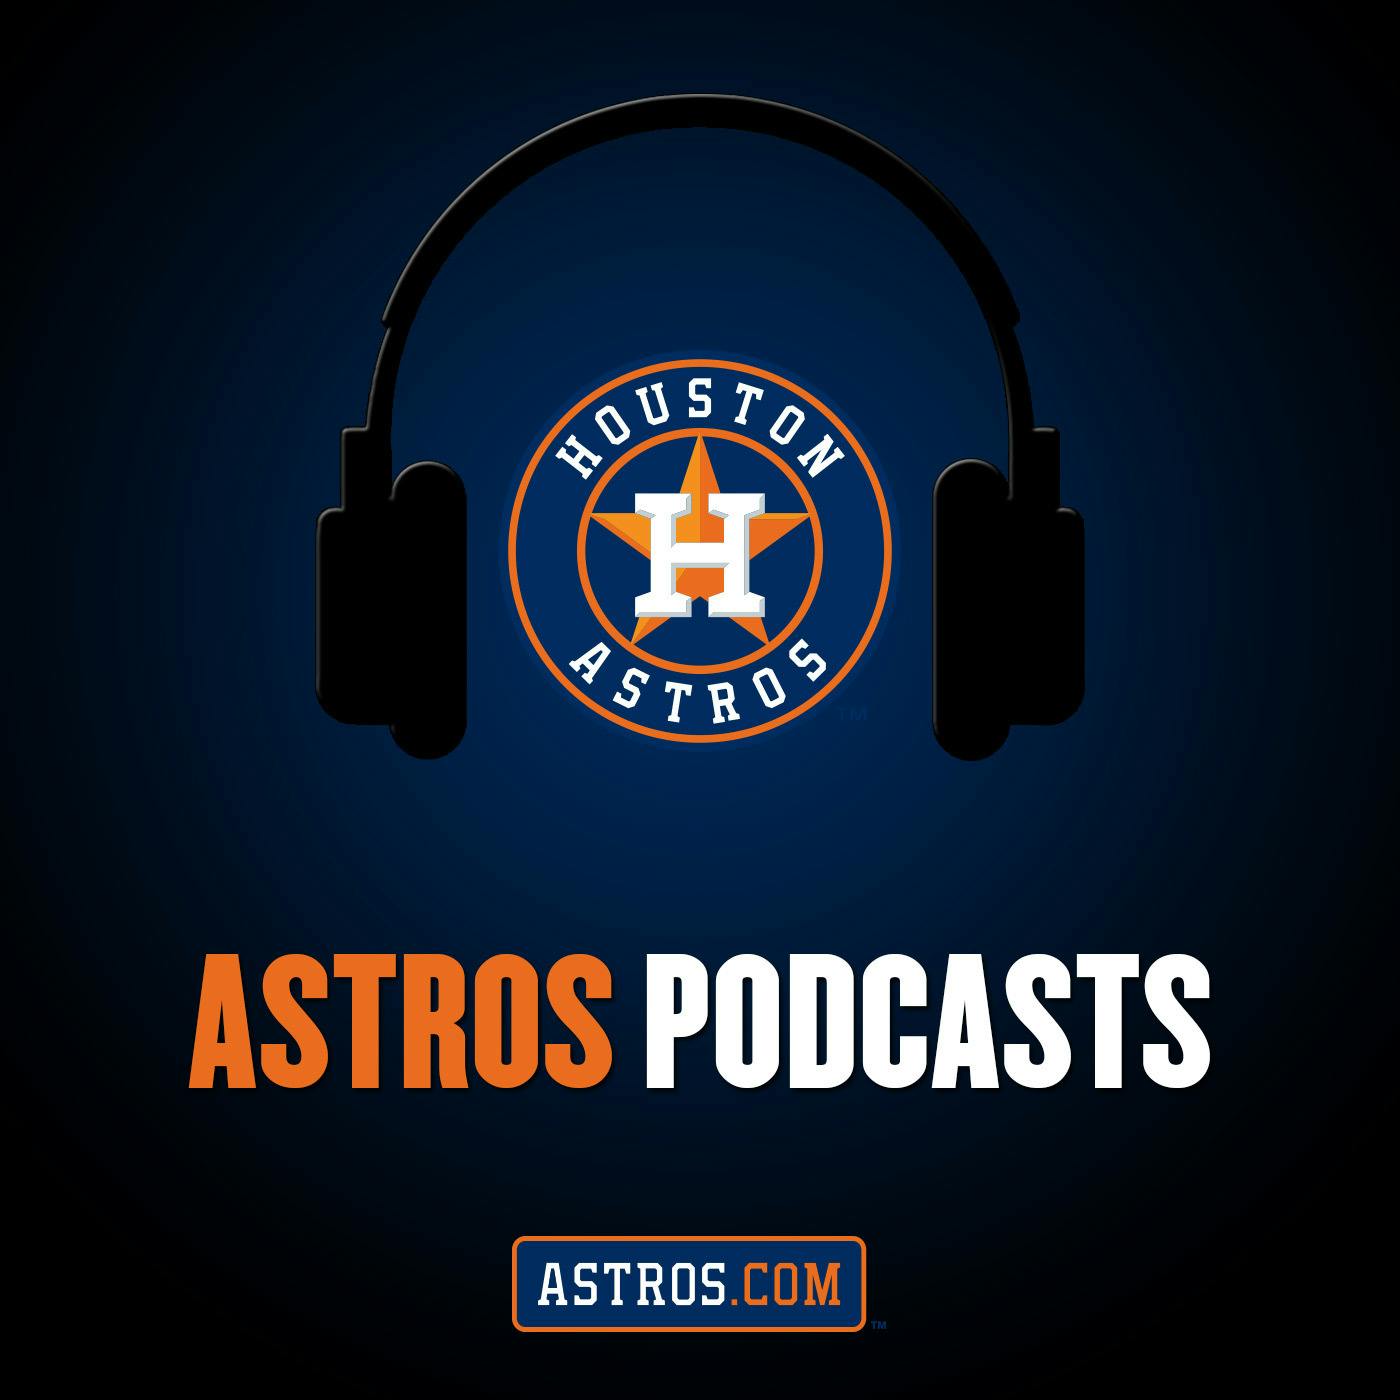 10/8 ASTROCAST by KARBACH BREWING: ALDS Game 4 Preview, Jose Altuve, Dusty Baker, Josh James, Jose Urquidy, and A’s broadcaster Ray Fosse